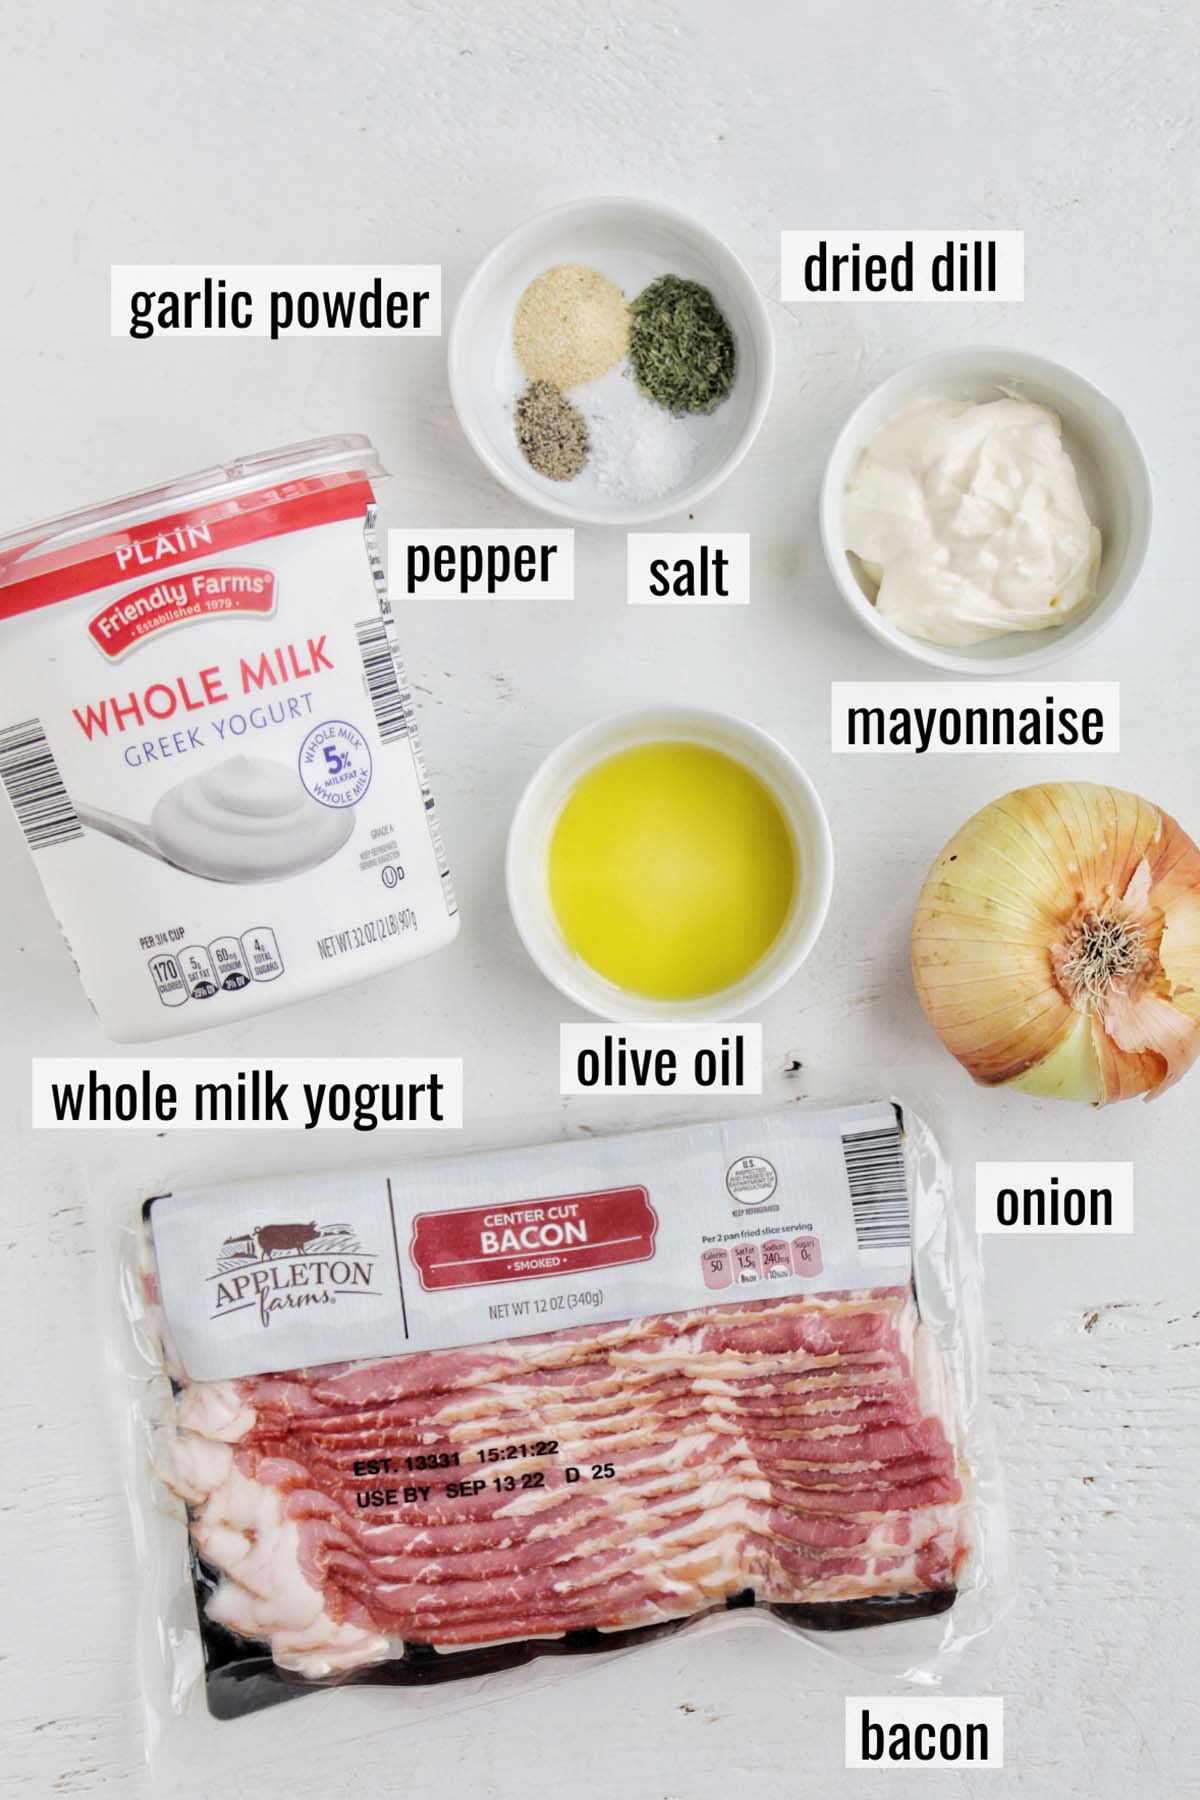 bacon and onion dip ingredients with labels.